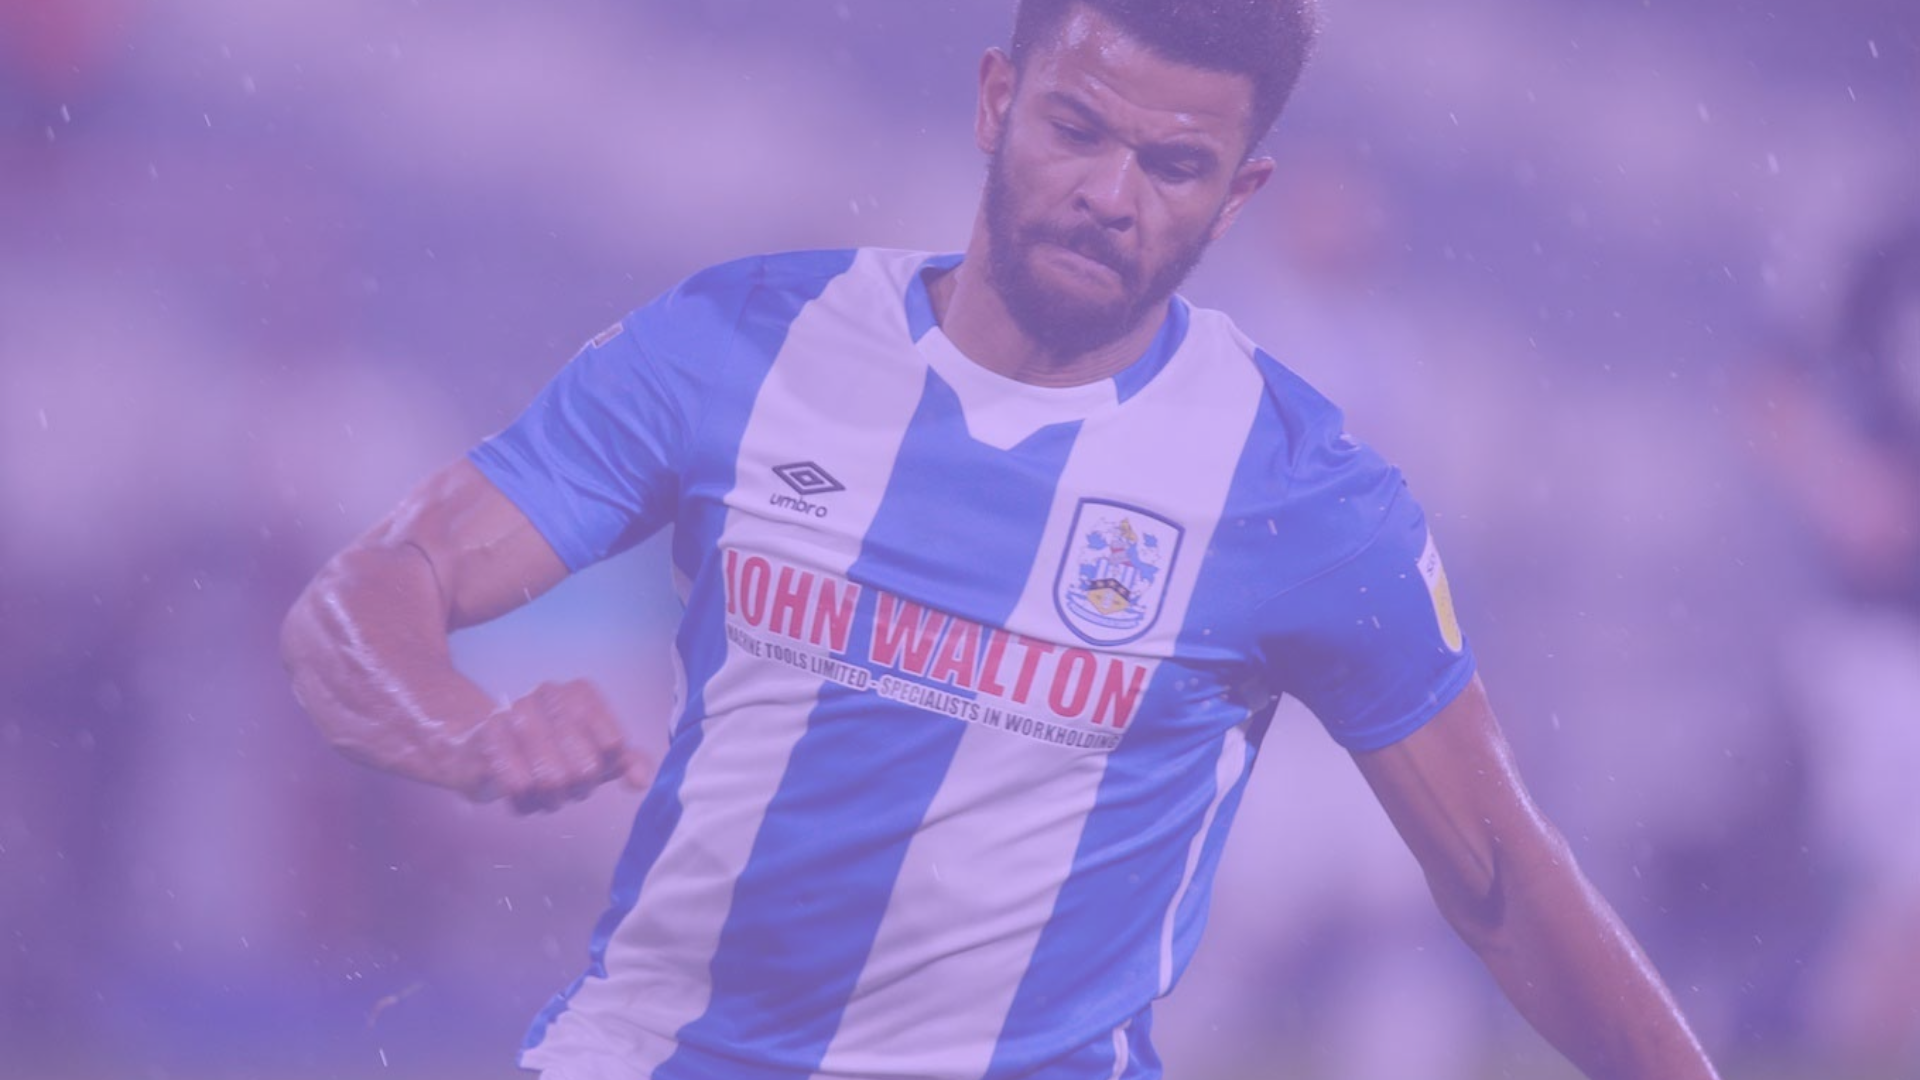 Why Huddersfield Town keeping changing their shirt sponsors